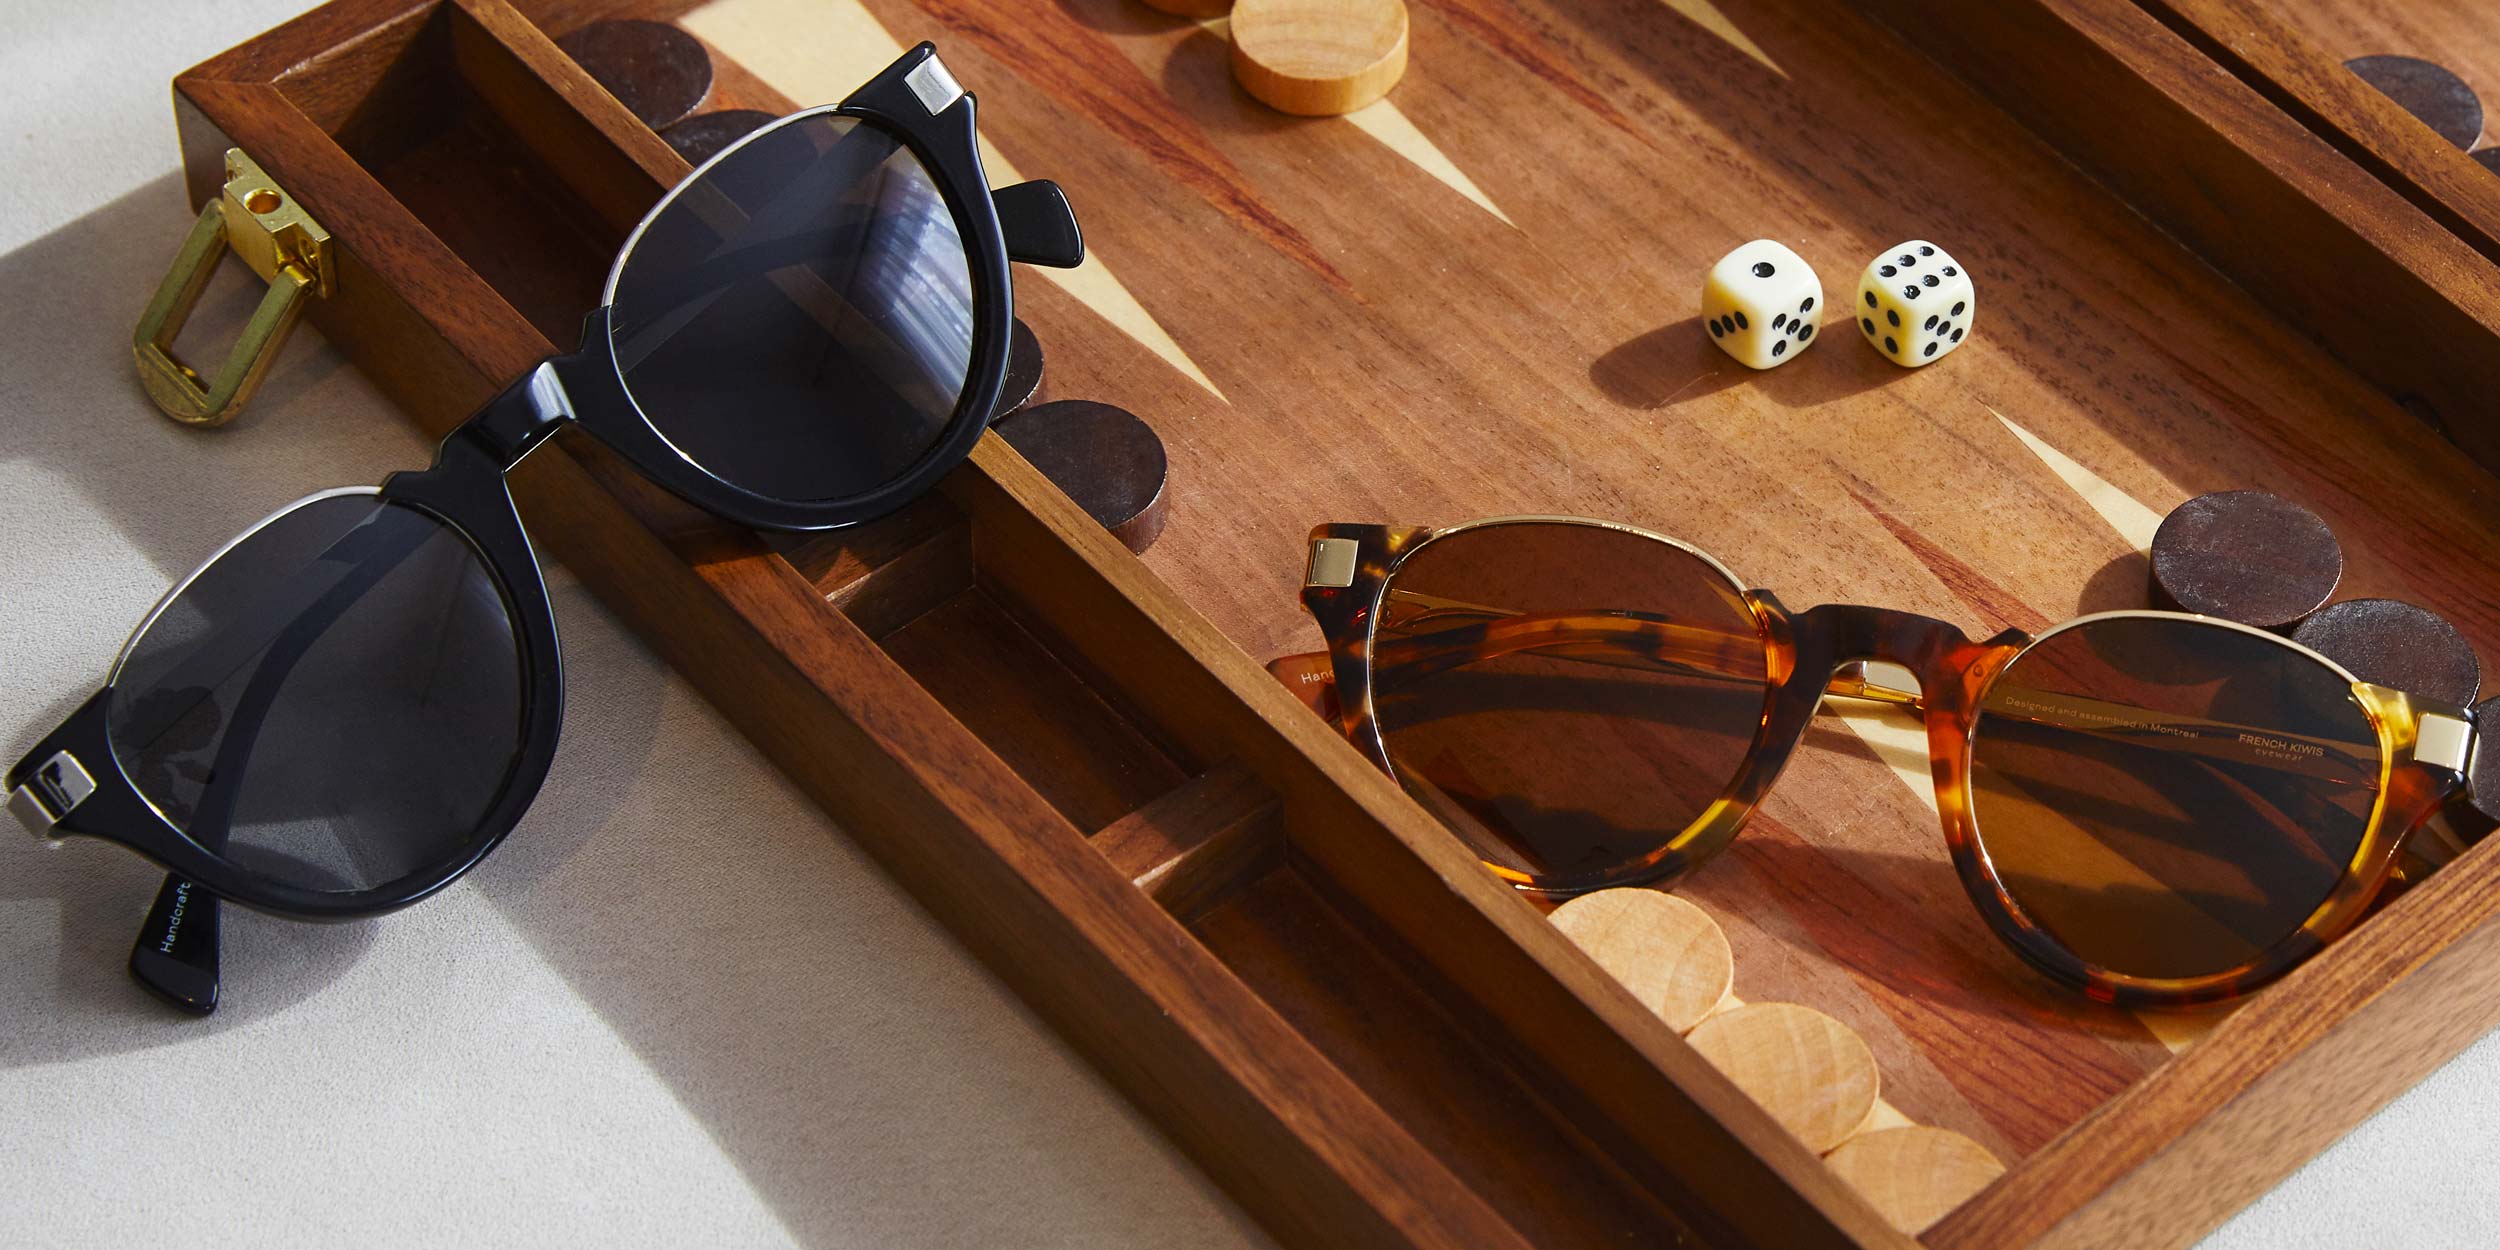 Photo Details of Charlie Sun Clear & Gold Sun Glasses in a room